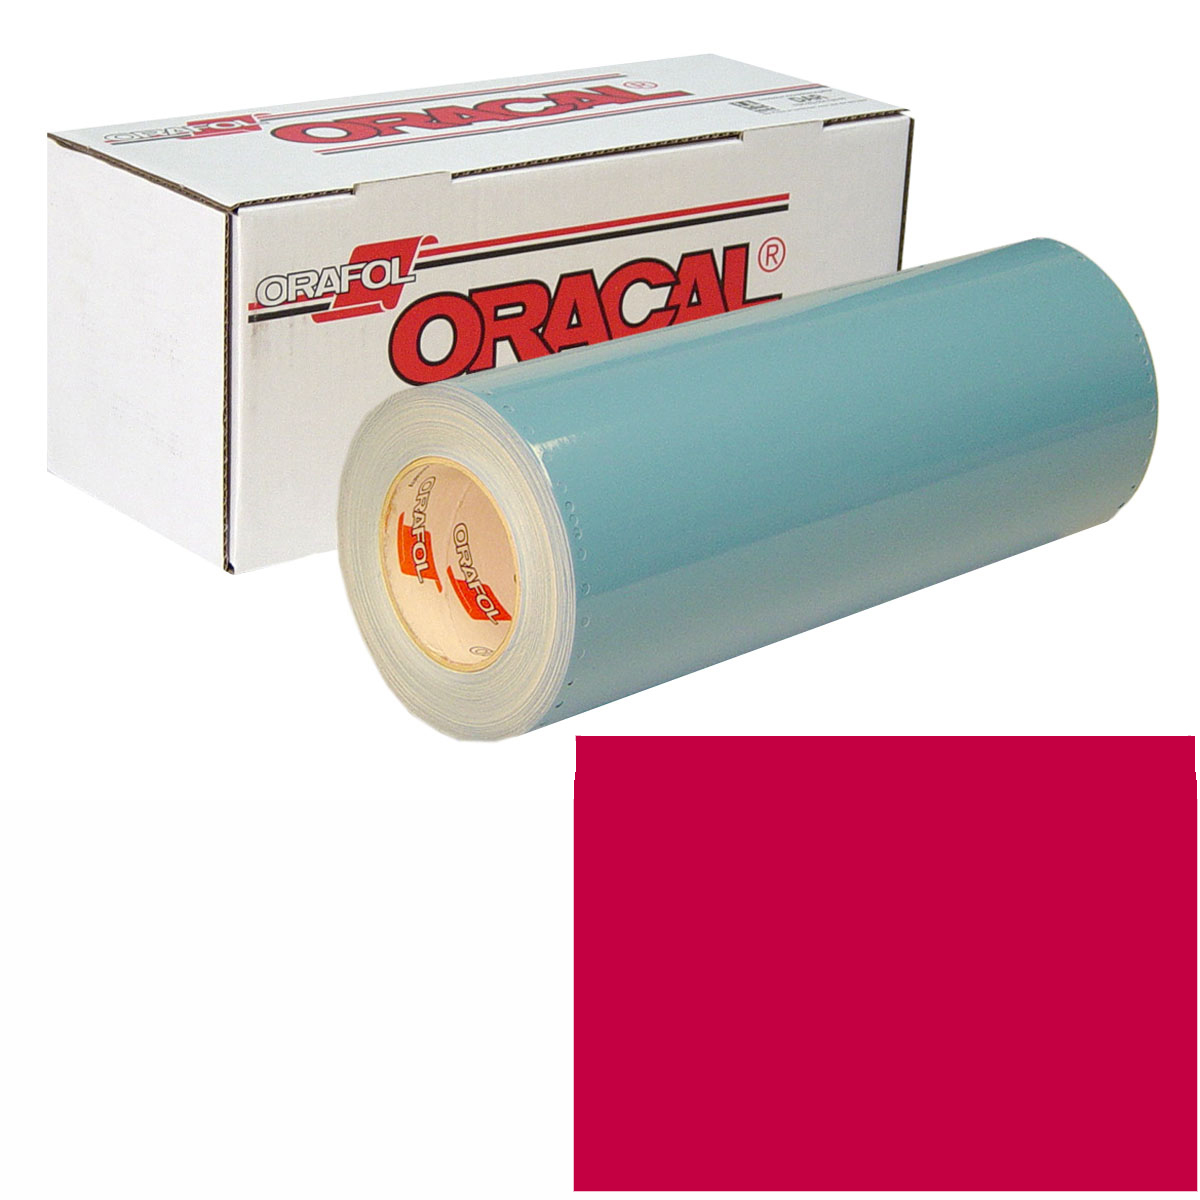 ORACAL 751RA 24in X 50yd 031 Red